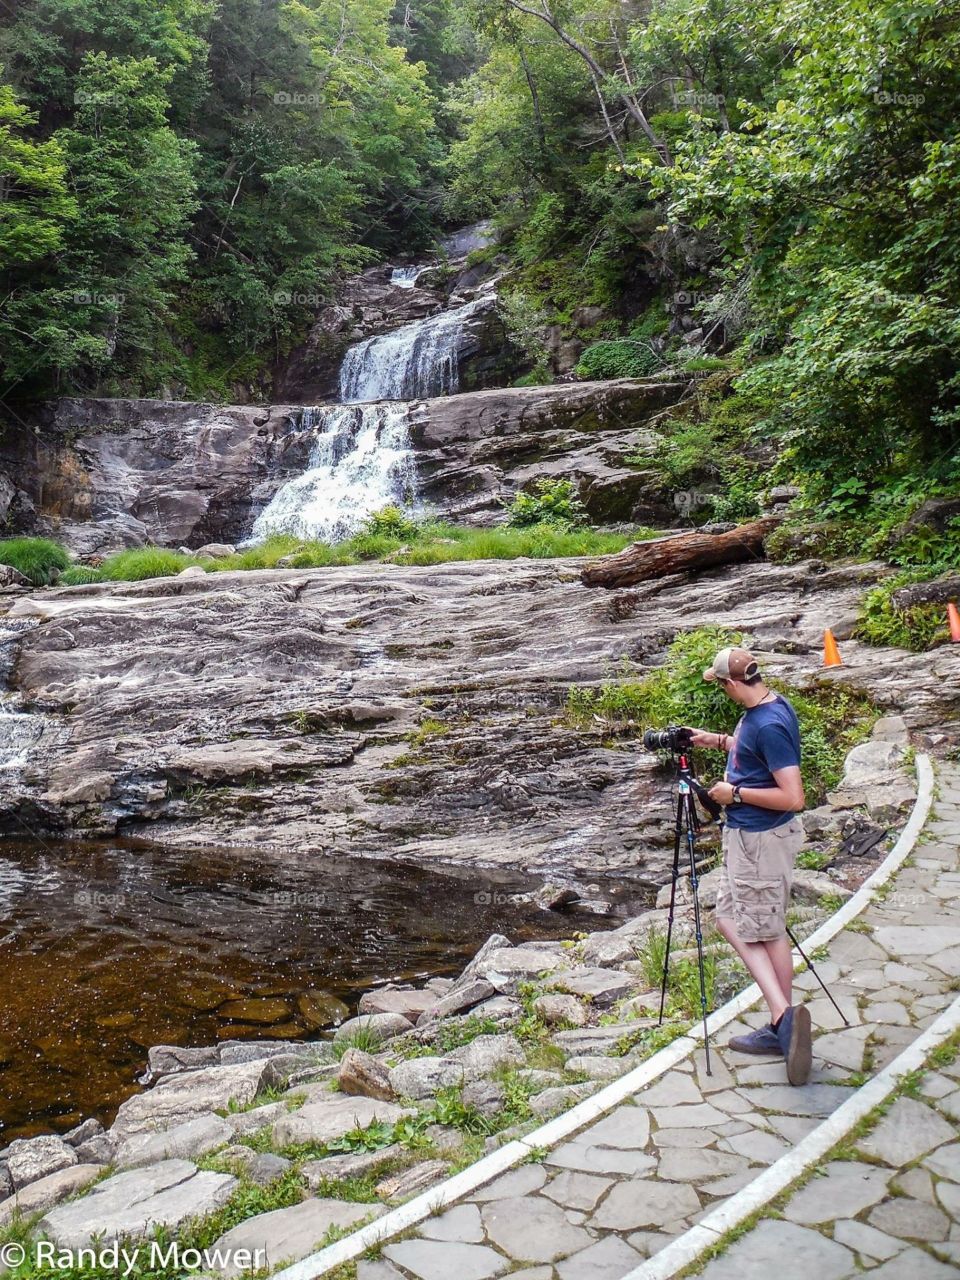 Taking photos of the waterfall in Kent CT